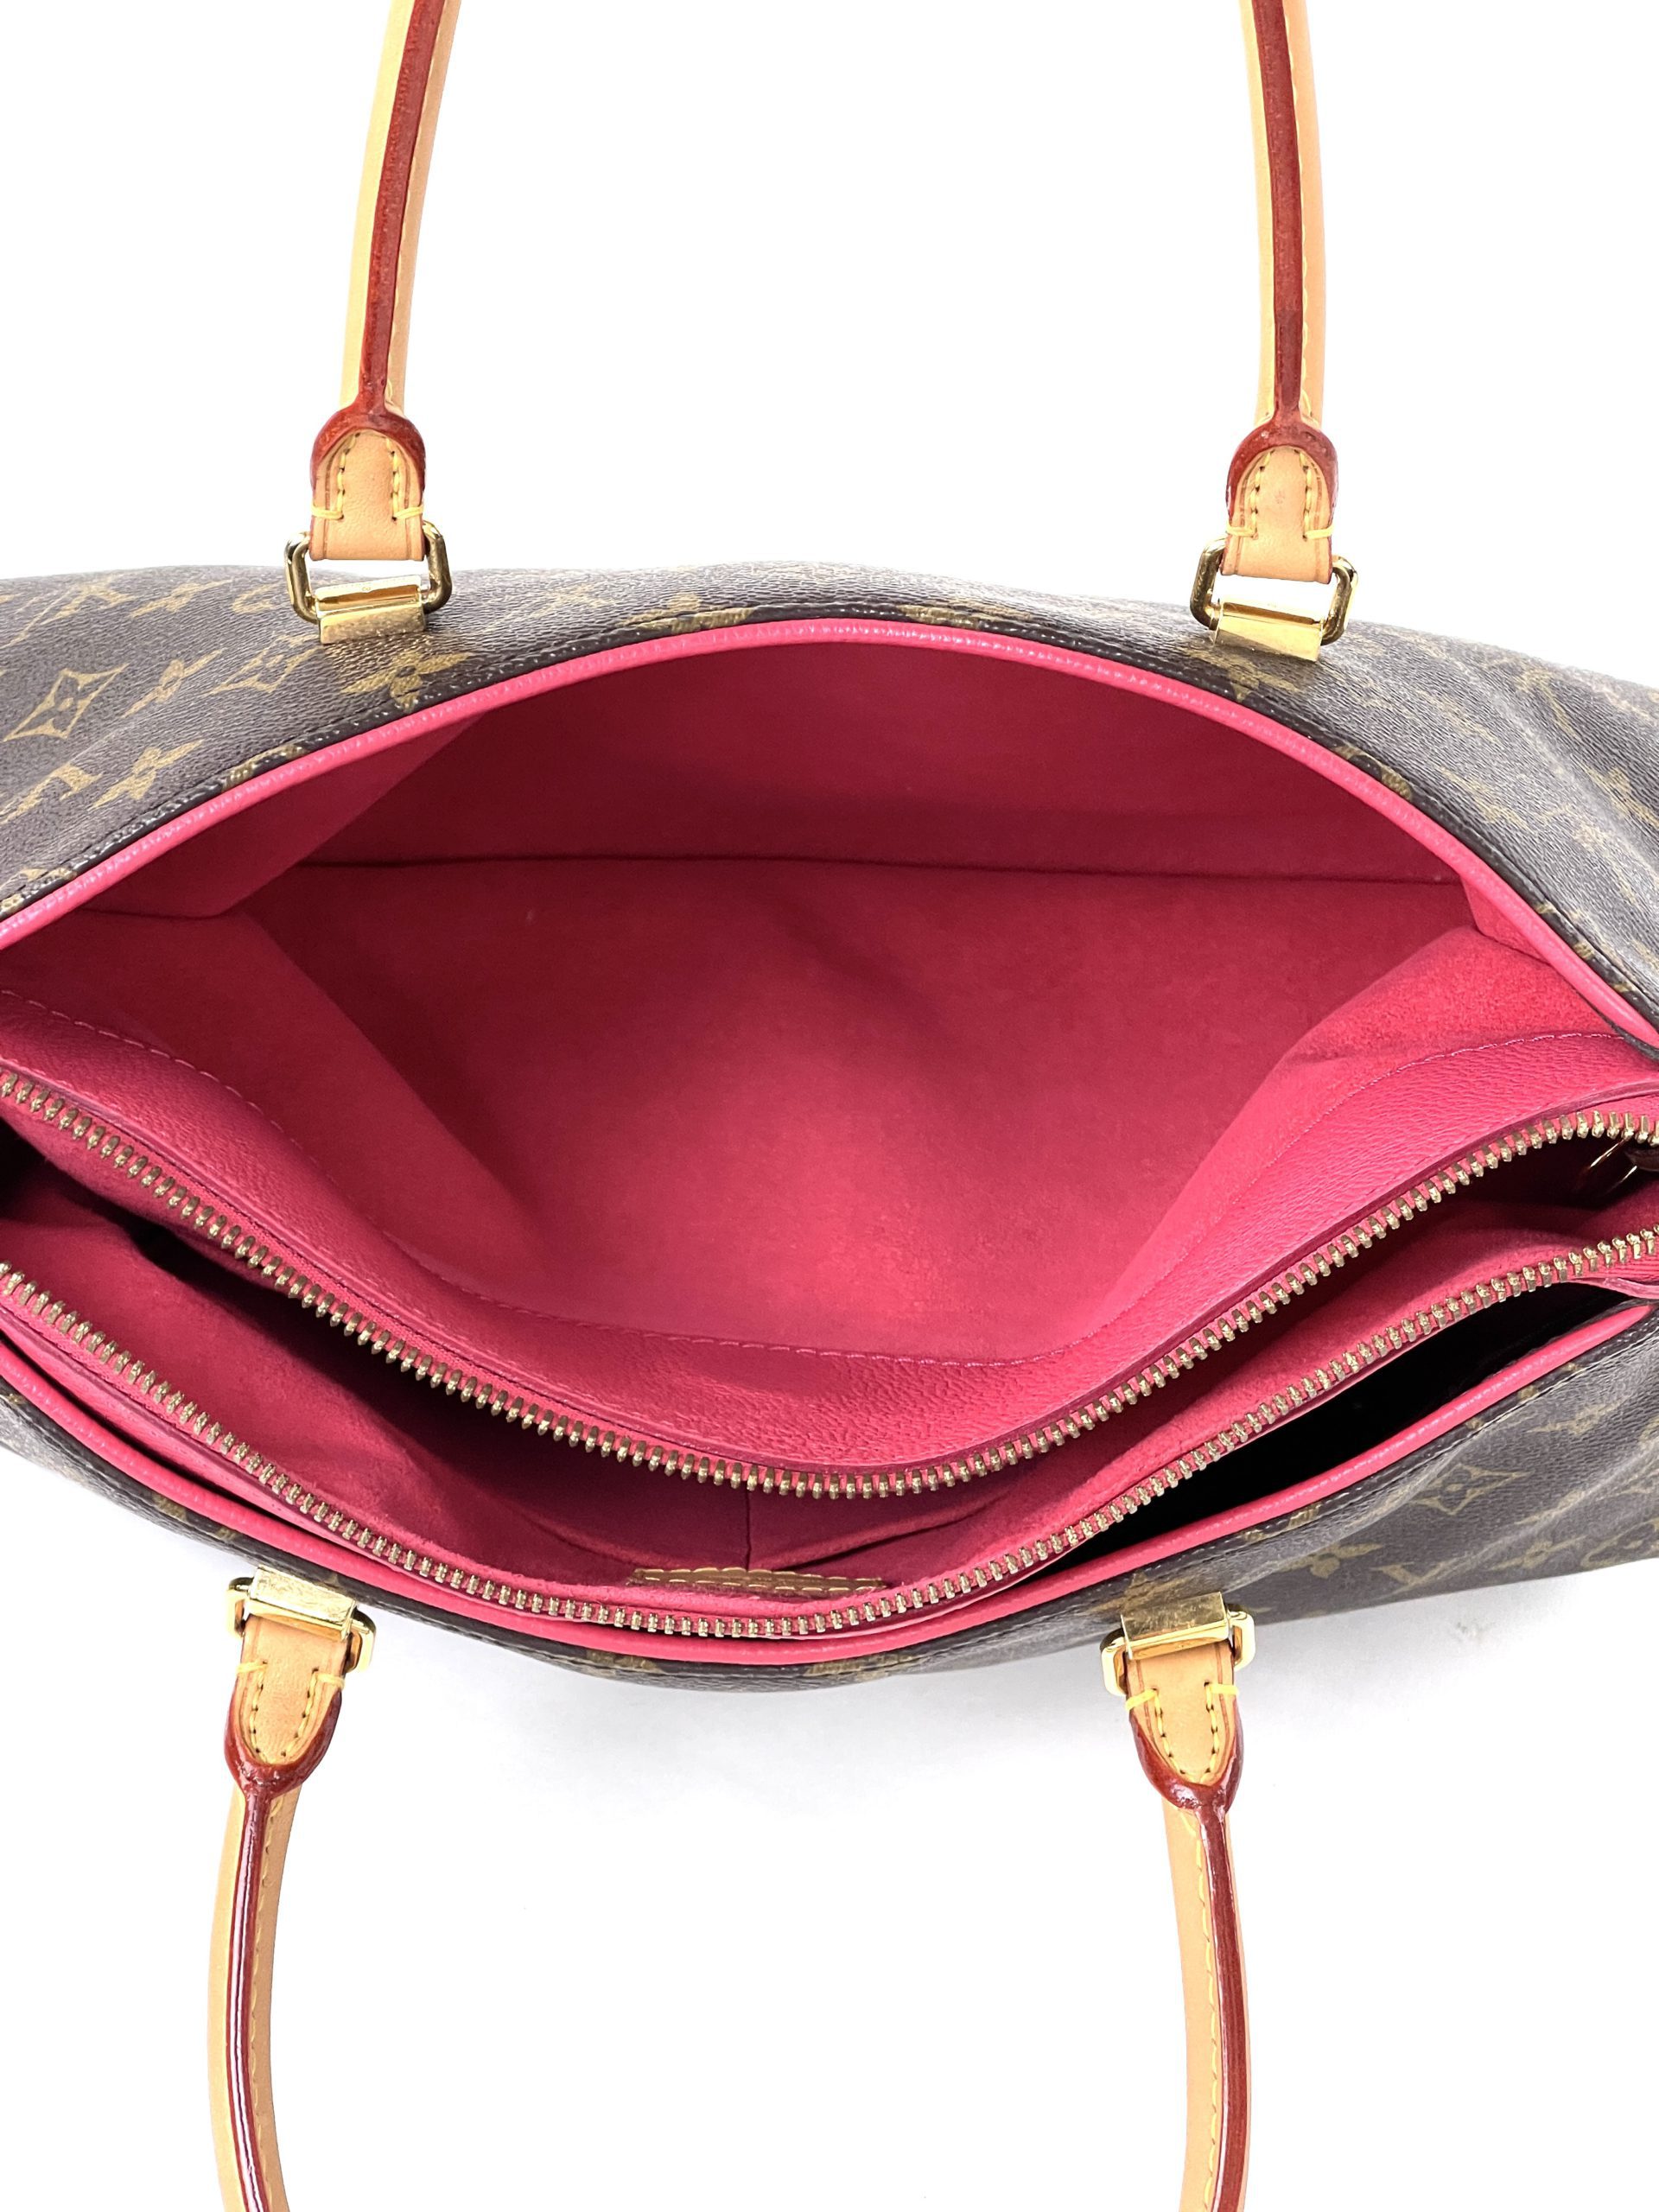 Louis Vuitton Monogram Pallas MM with Hot Pink - A World Of Goods